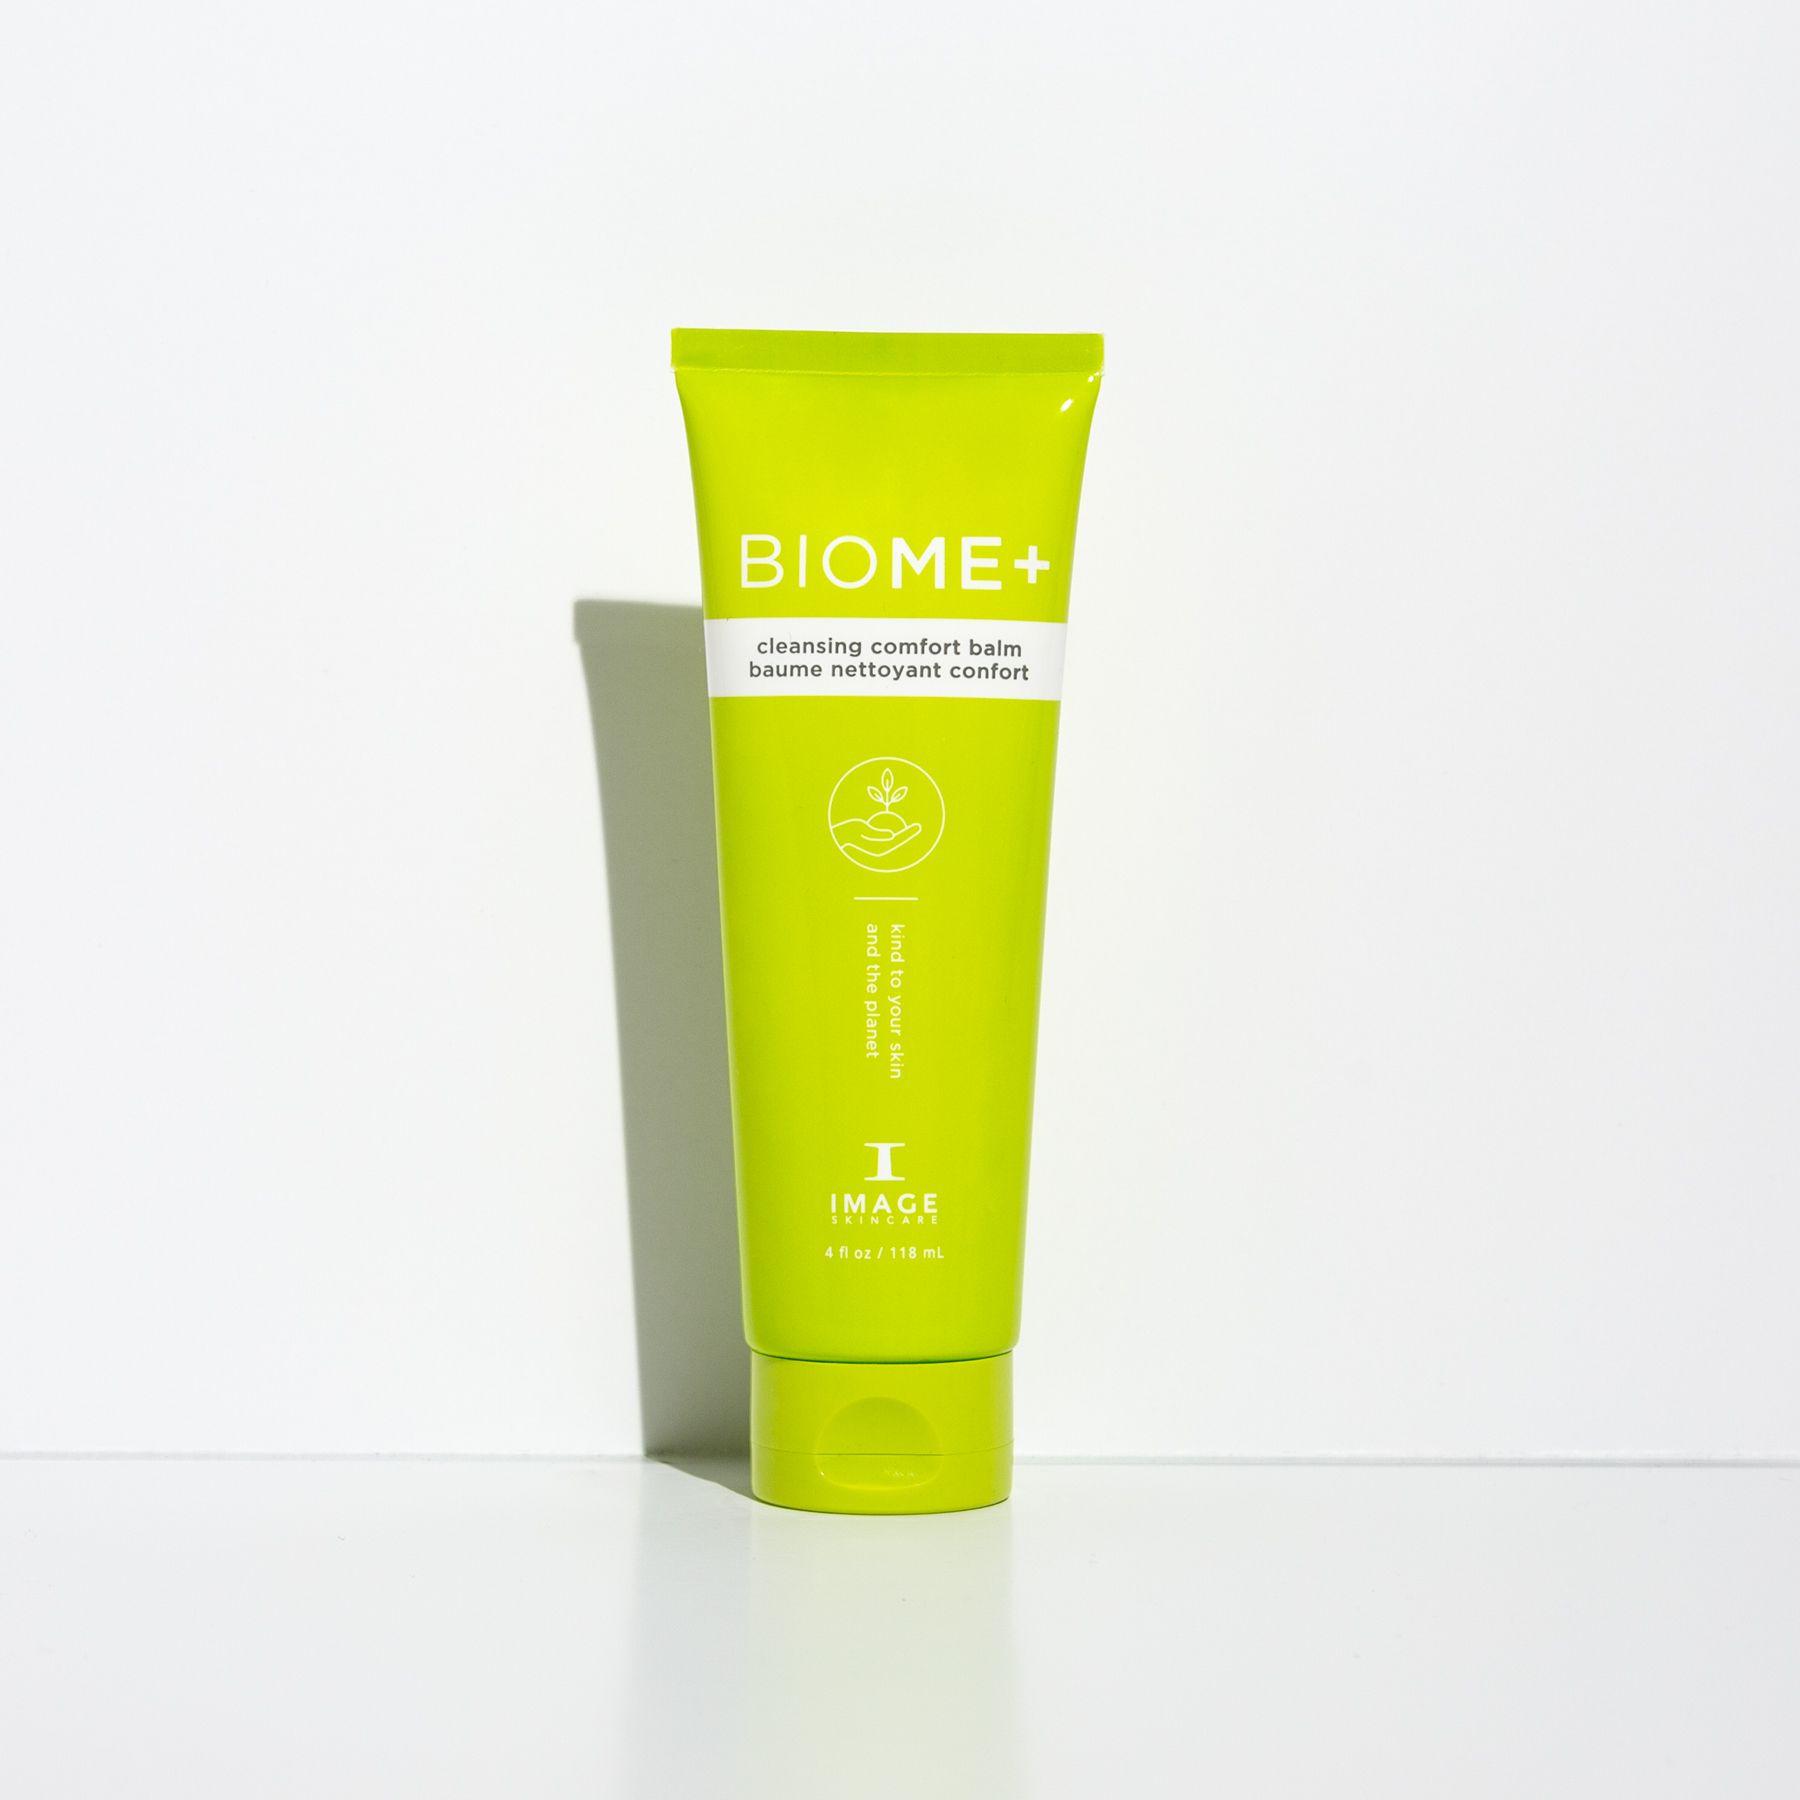 BIOME+ Cleansing Comfort Balm - Katey's Health & Beauty Clinic